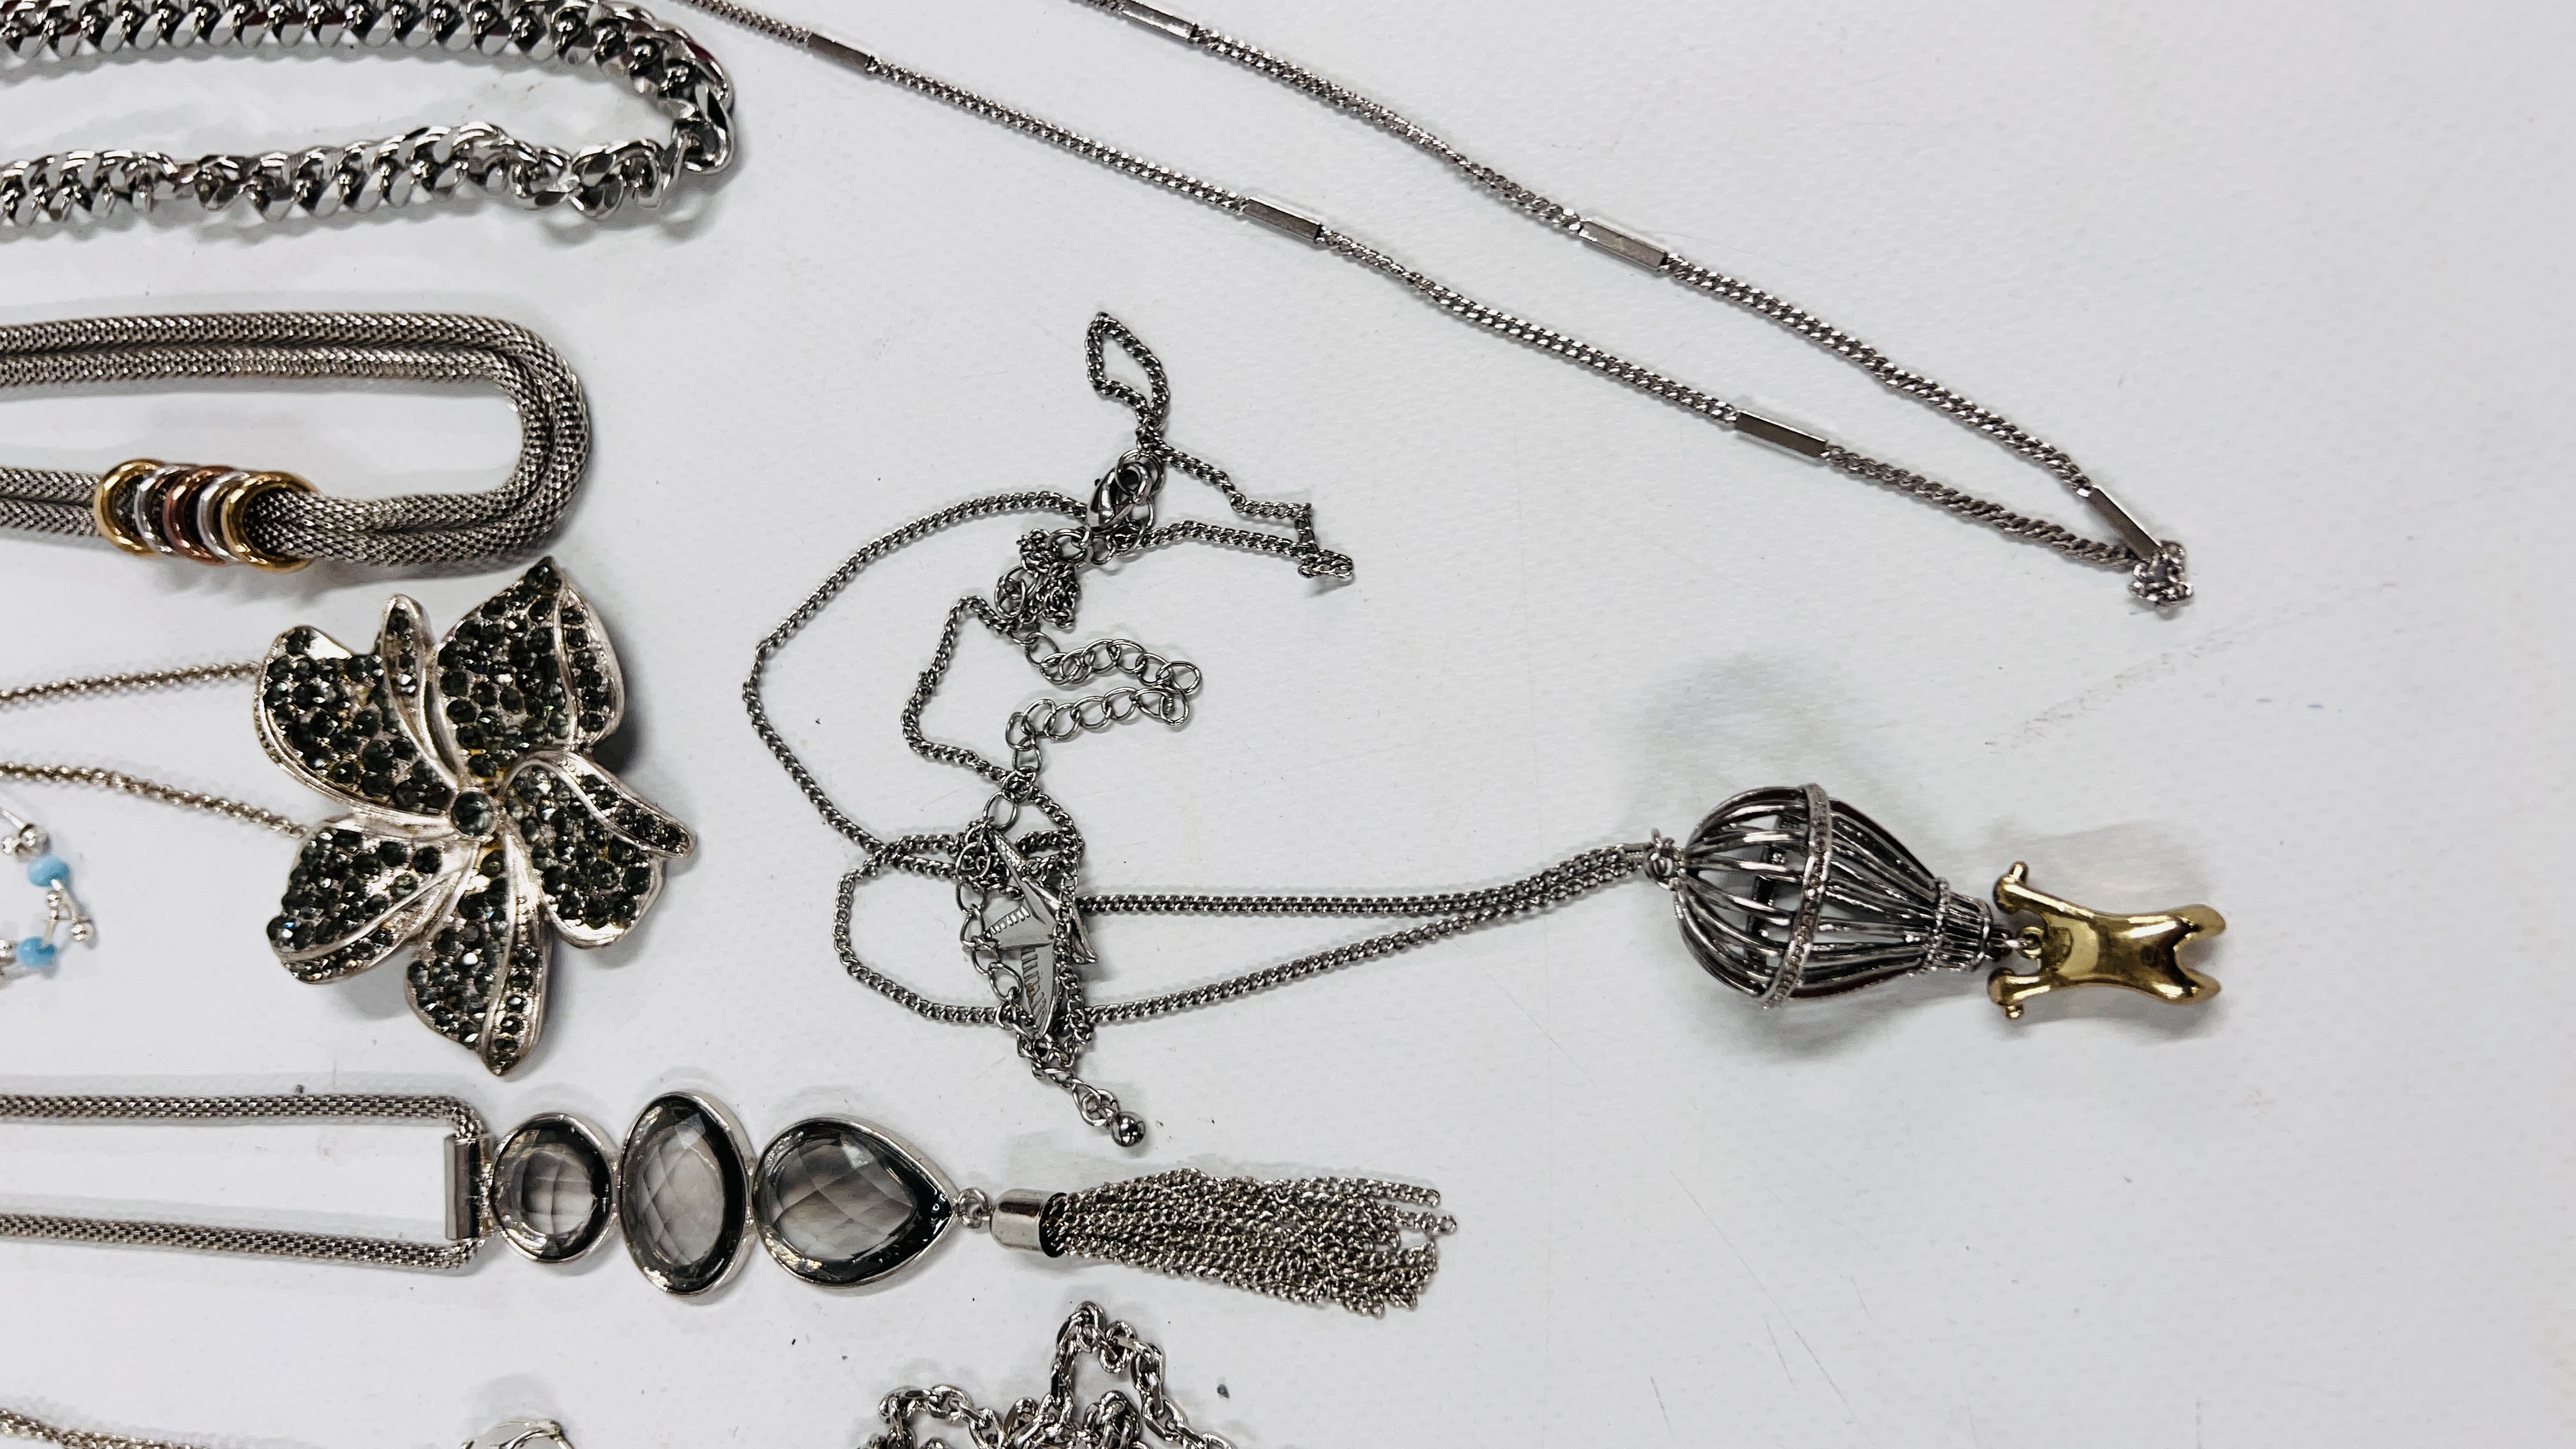 SELECTION OF SILVERTONE COSTUME JEWELLERY ALONG WITH A JEWELLERY BOX FULL OF BEADED NECKLACES. - Image 2 of 12